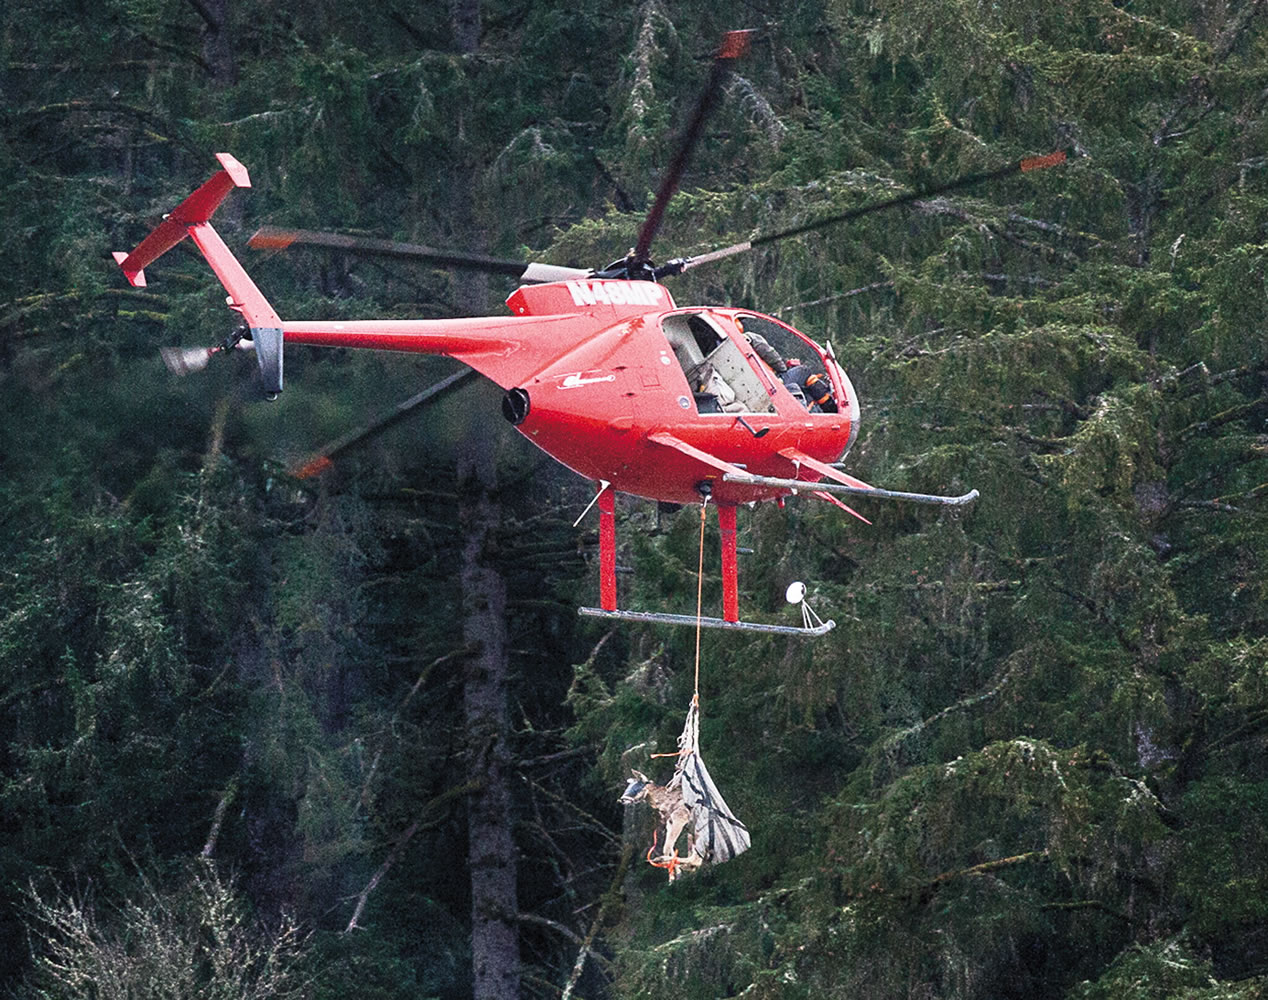 A blindfolded and hobbled Columbian deer is airlifted after capture Tuesday at the Julia Butler Hansen National Wildlife Refuge near Cathlamet.